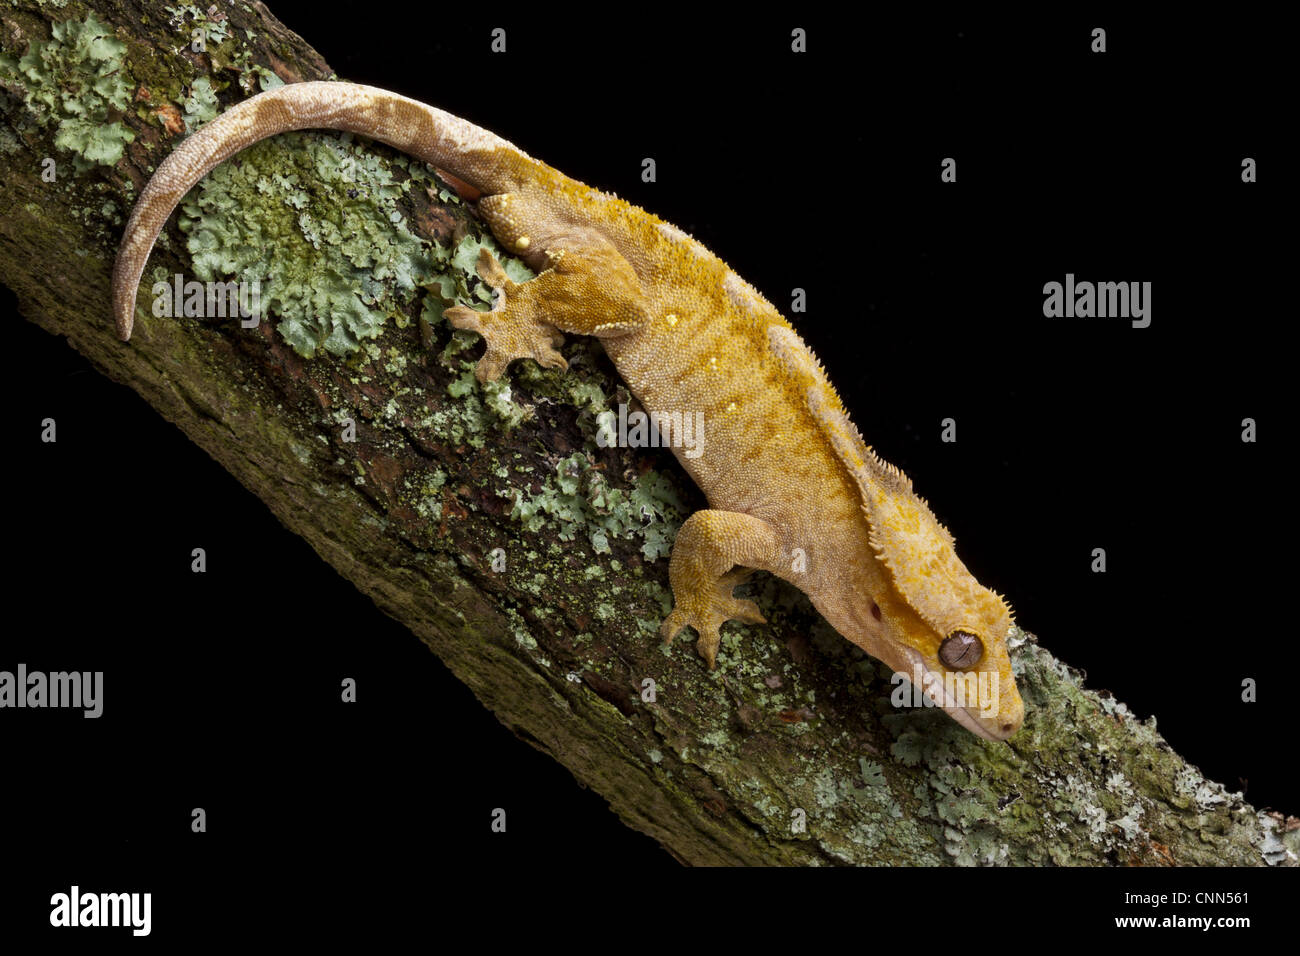 New Caledonian Crested Gecko (Rhacodactylus ciliatus) adult, resting on branch, New Caledonia Stock Photo